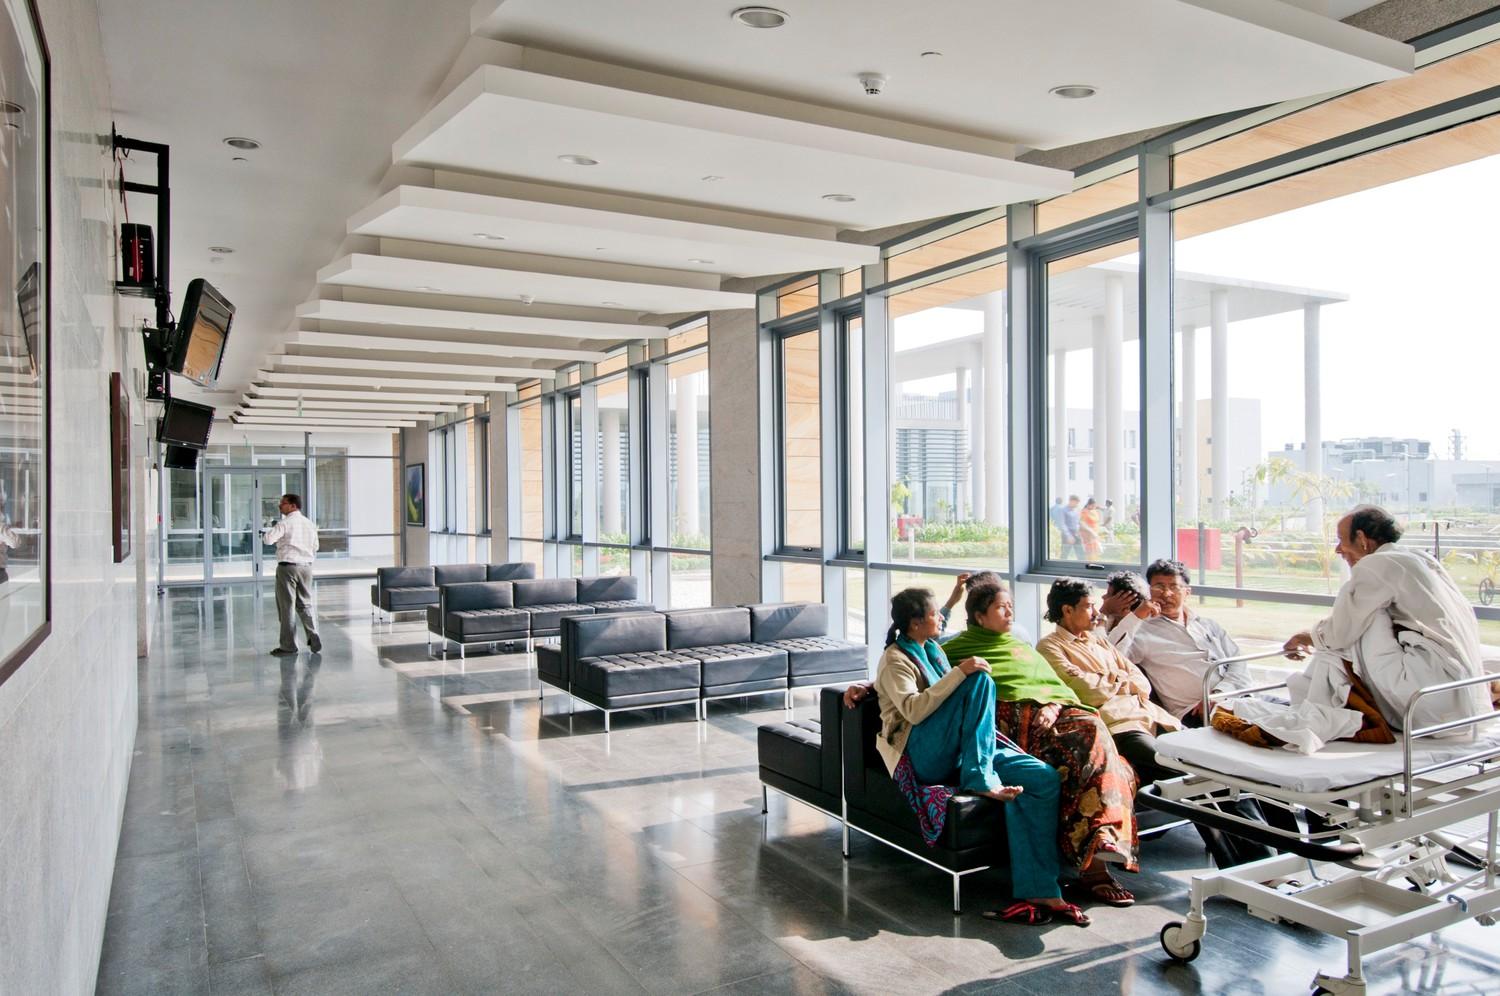 Generous light filled waiting areas respond to the family centric model of care that prevails in the region.